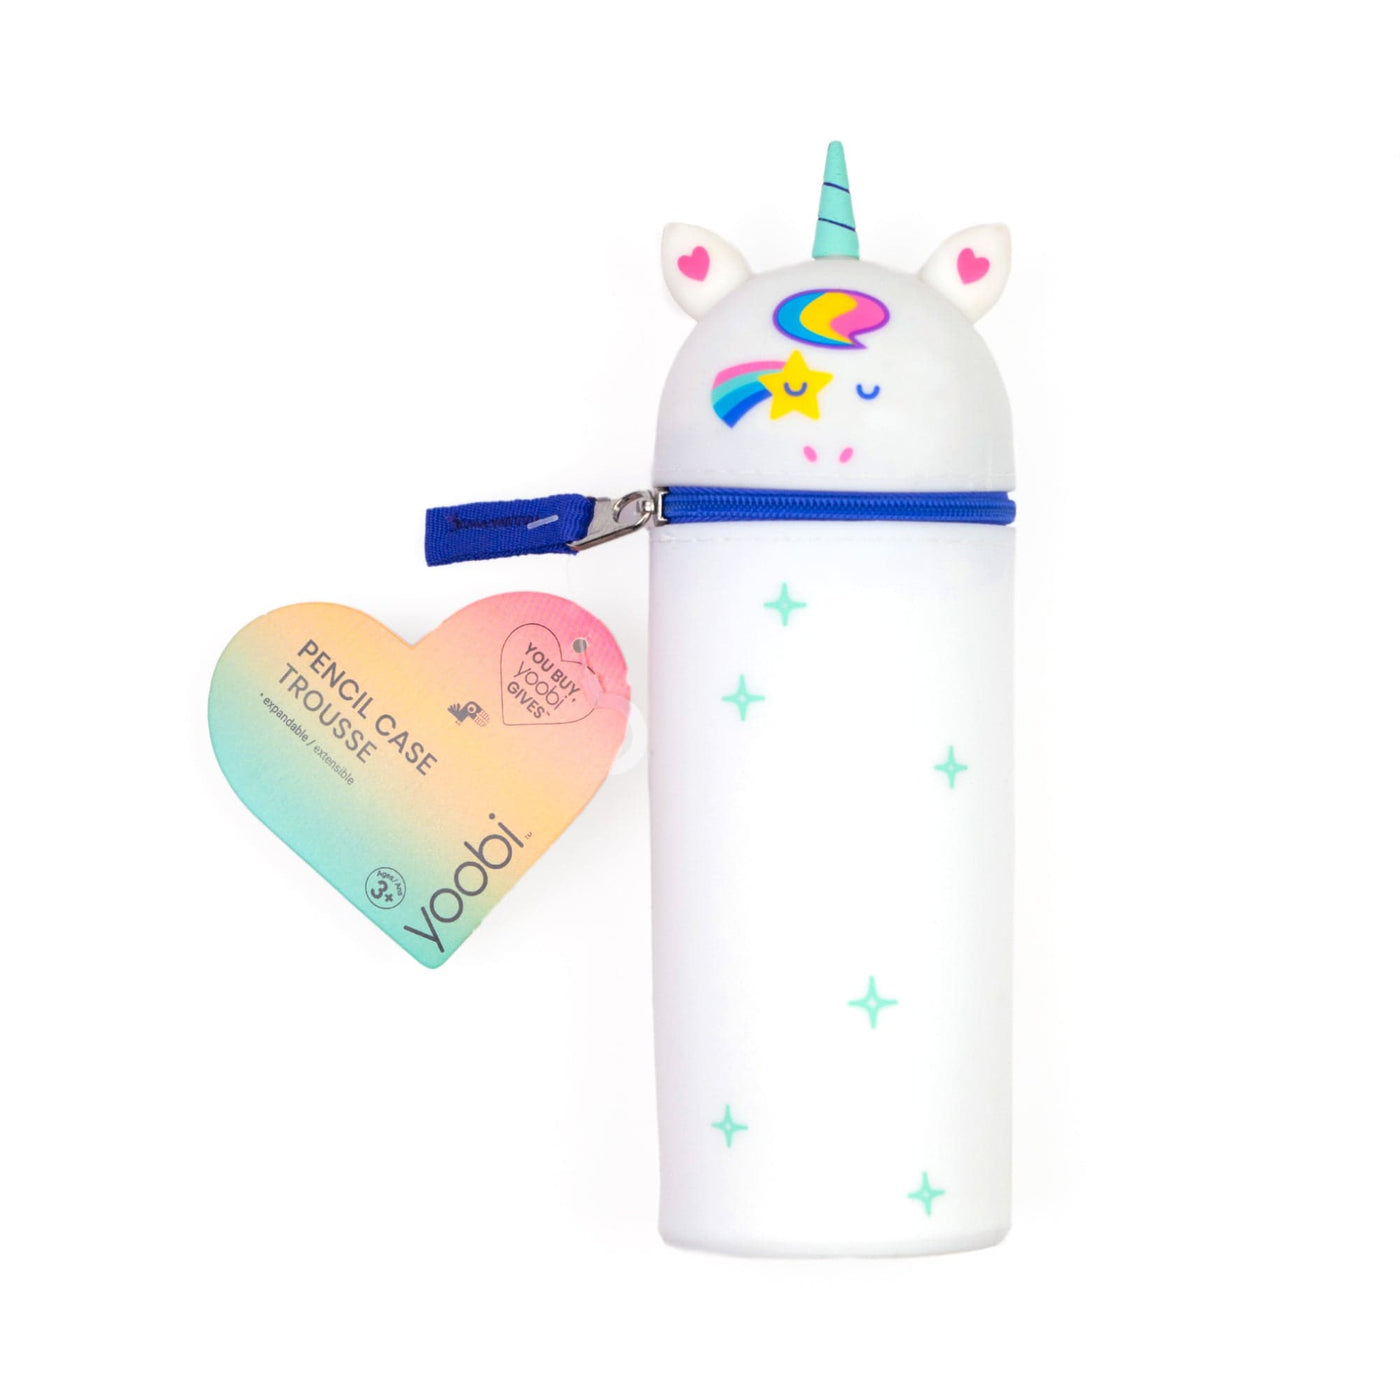 Standing unicorn pencil case shown with Yoobi label tag